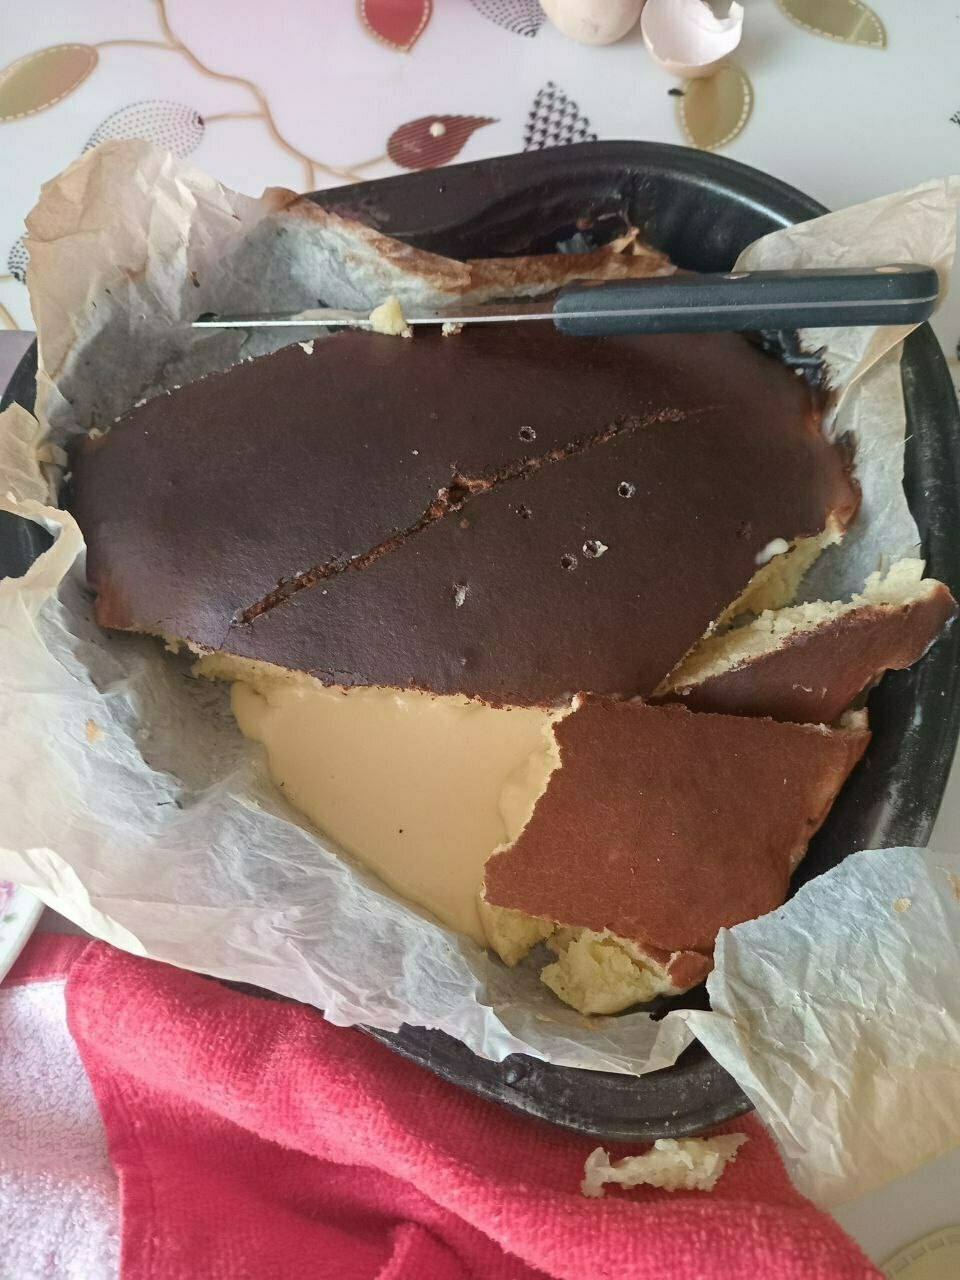 pastry in a heart shaped baking pan with a brown top but cut open to reveal pale, uncooked batter inside